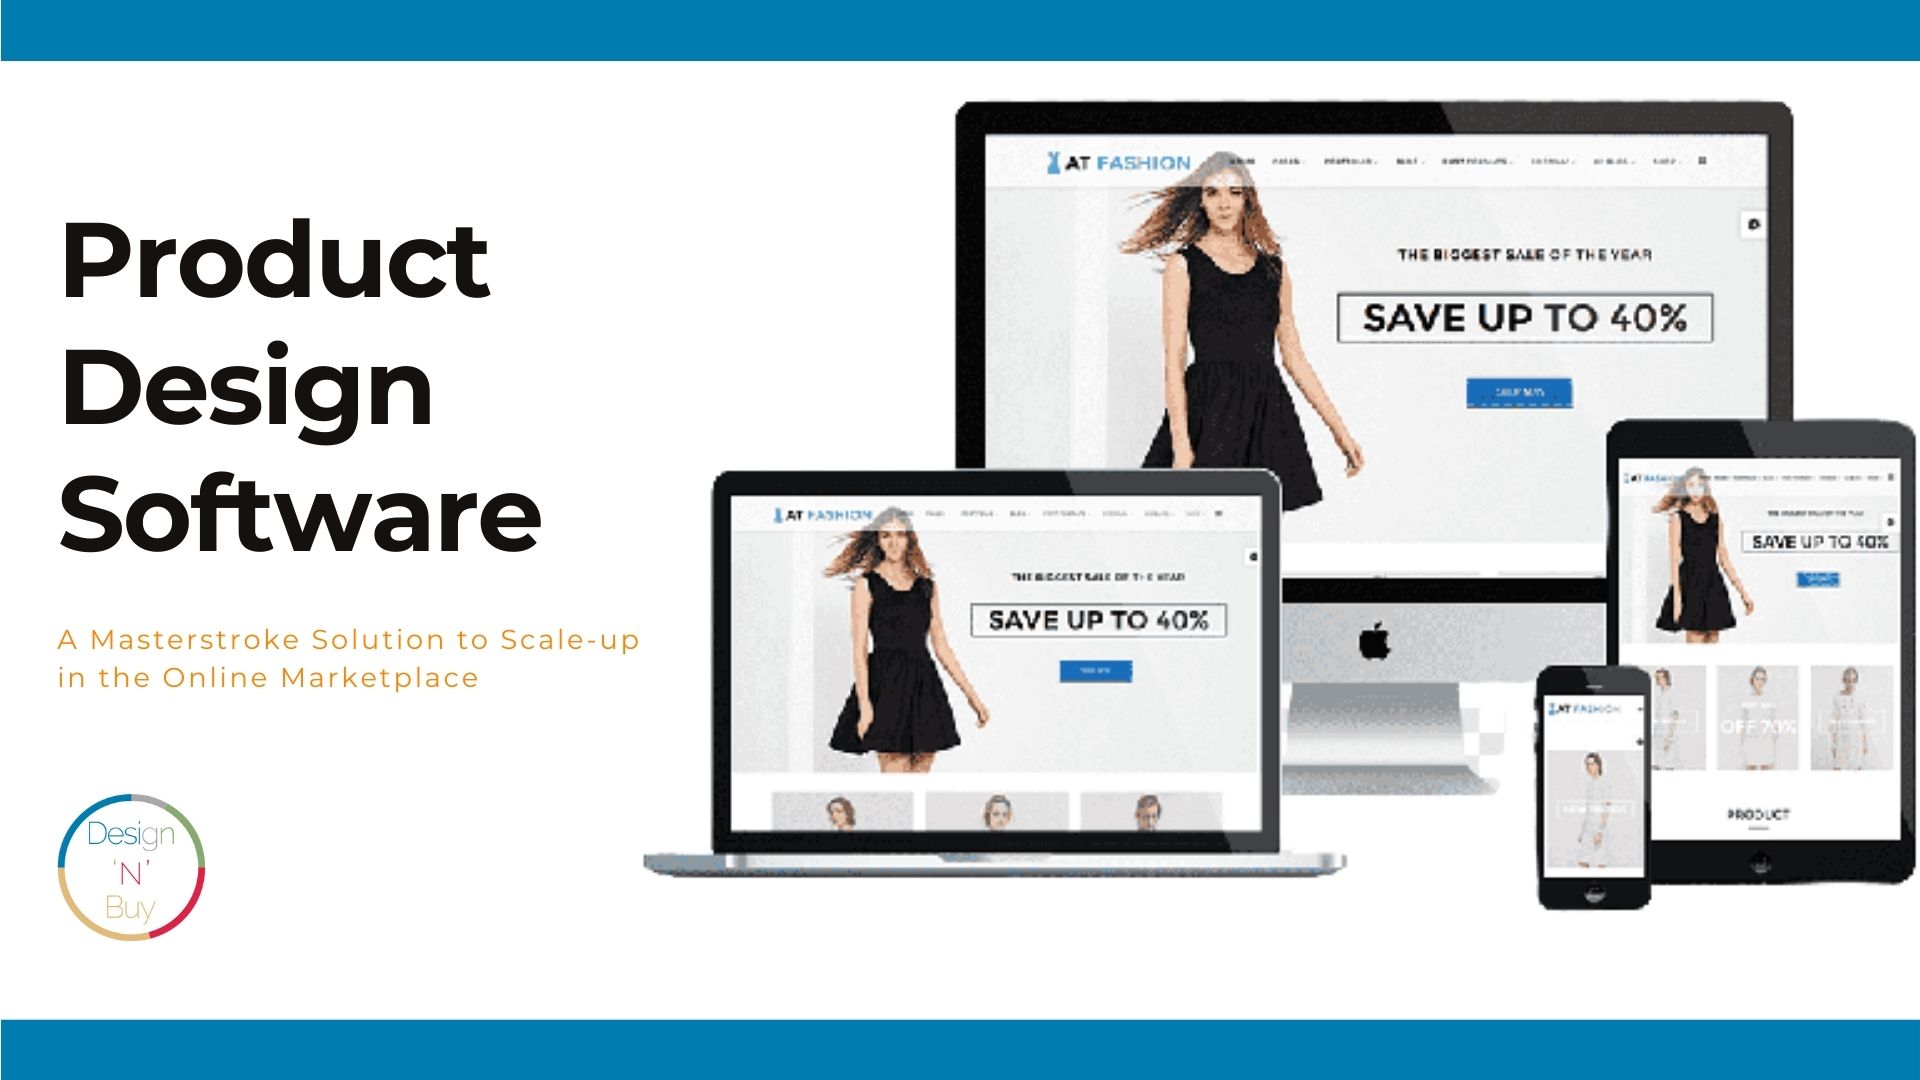 Product Design Software: All You Need To Run An Online Fashion Store Leveraging The Current Trends  